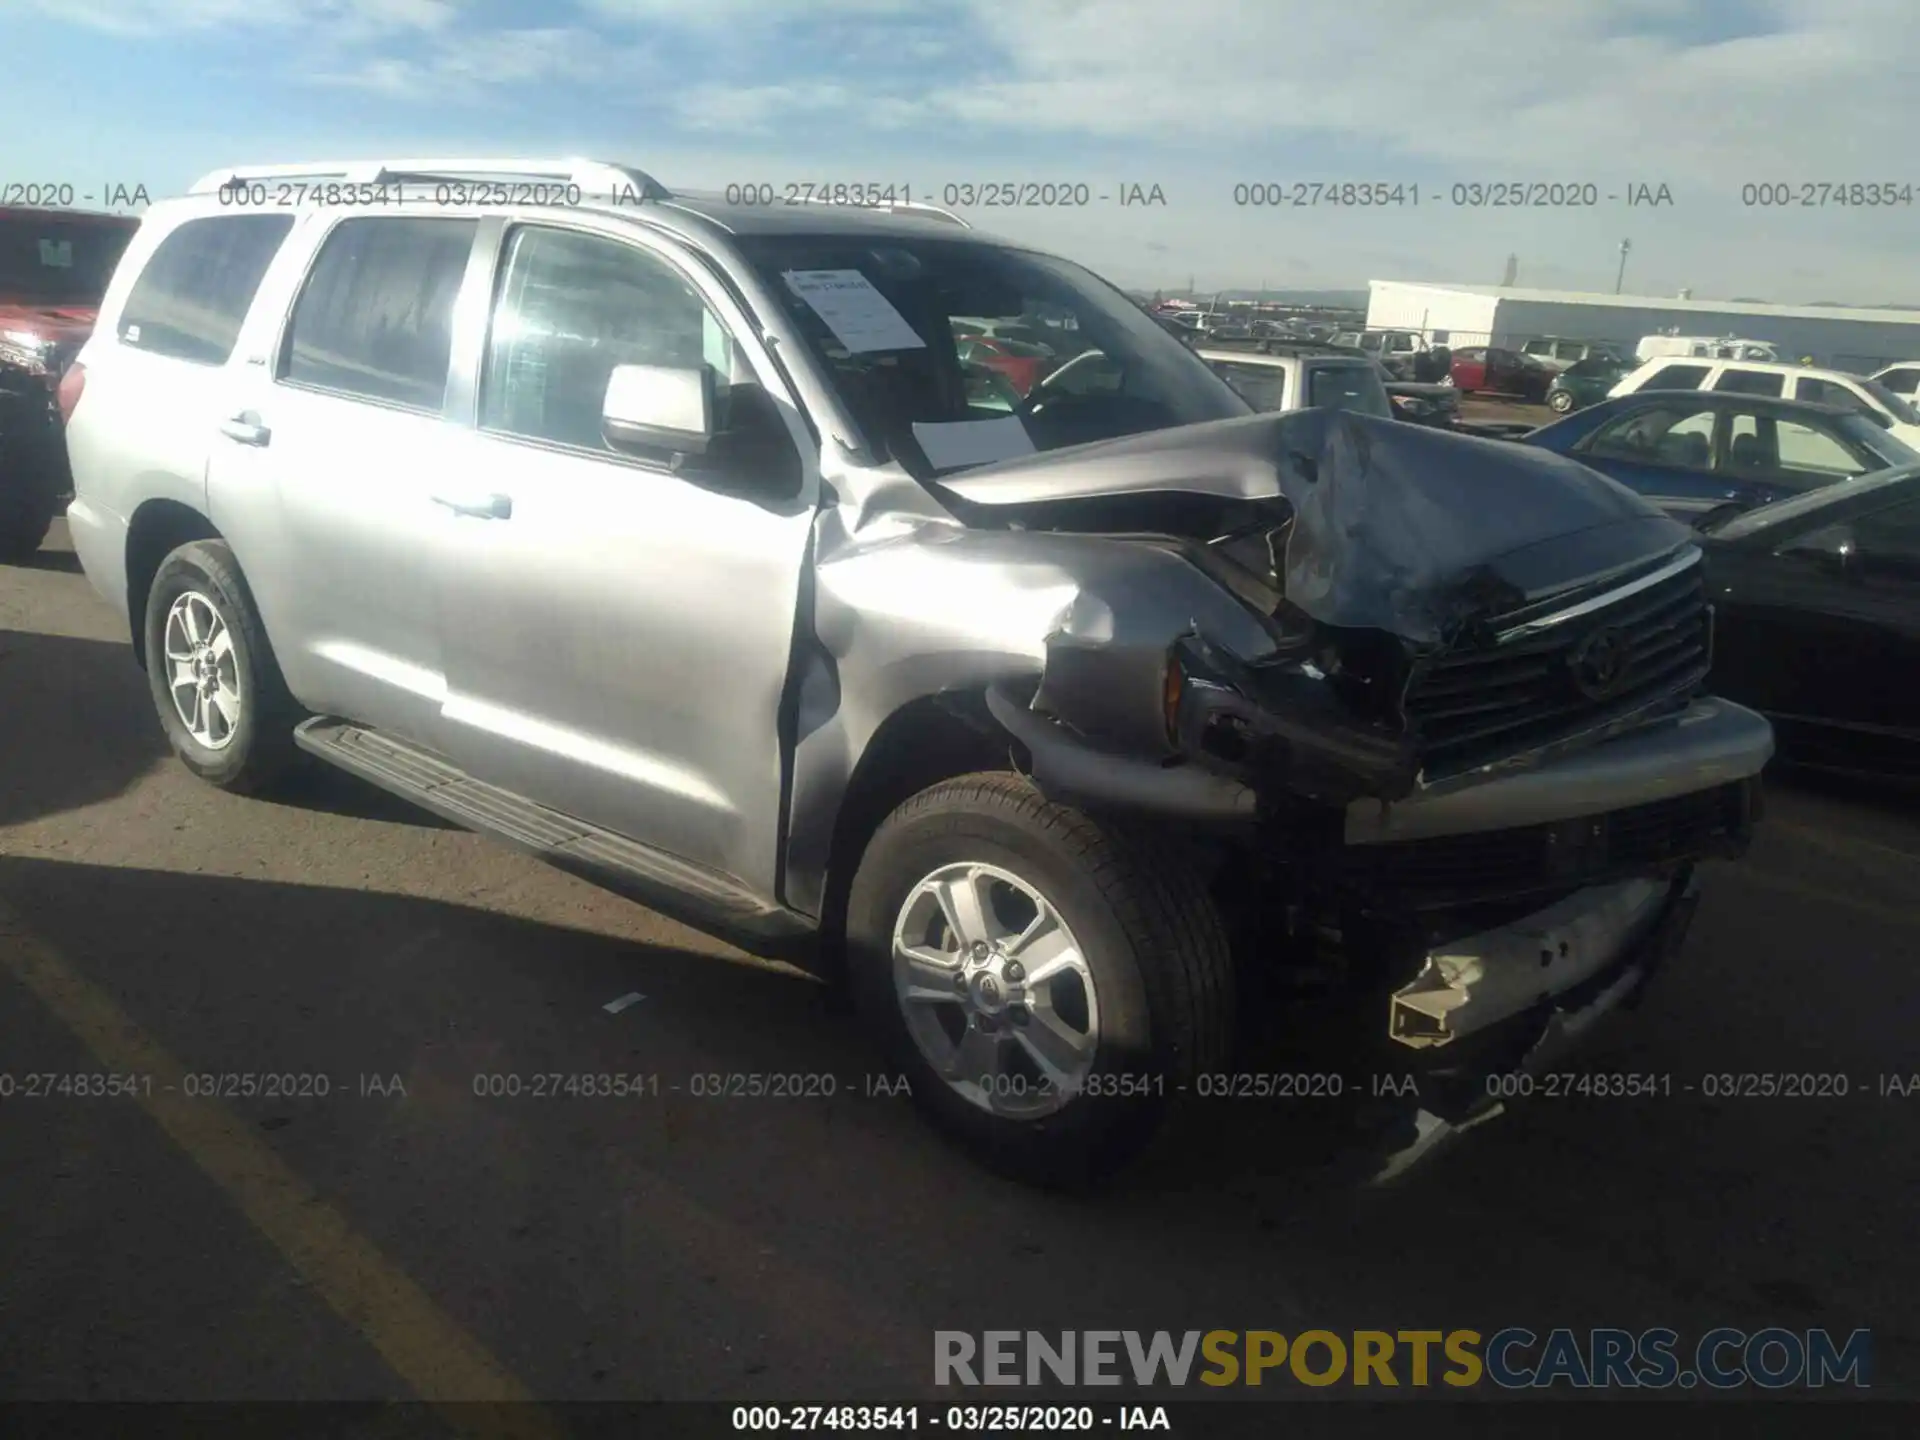 1 Photograph of a damaged car 5TDBY5G10KS169013 TOYOTA SEQUOIA 2019